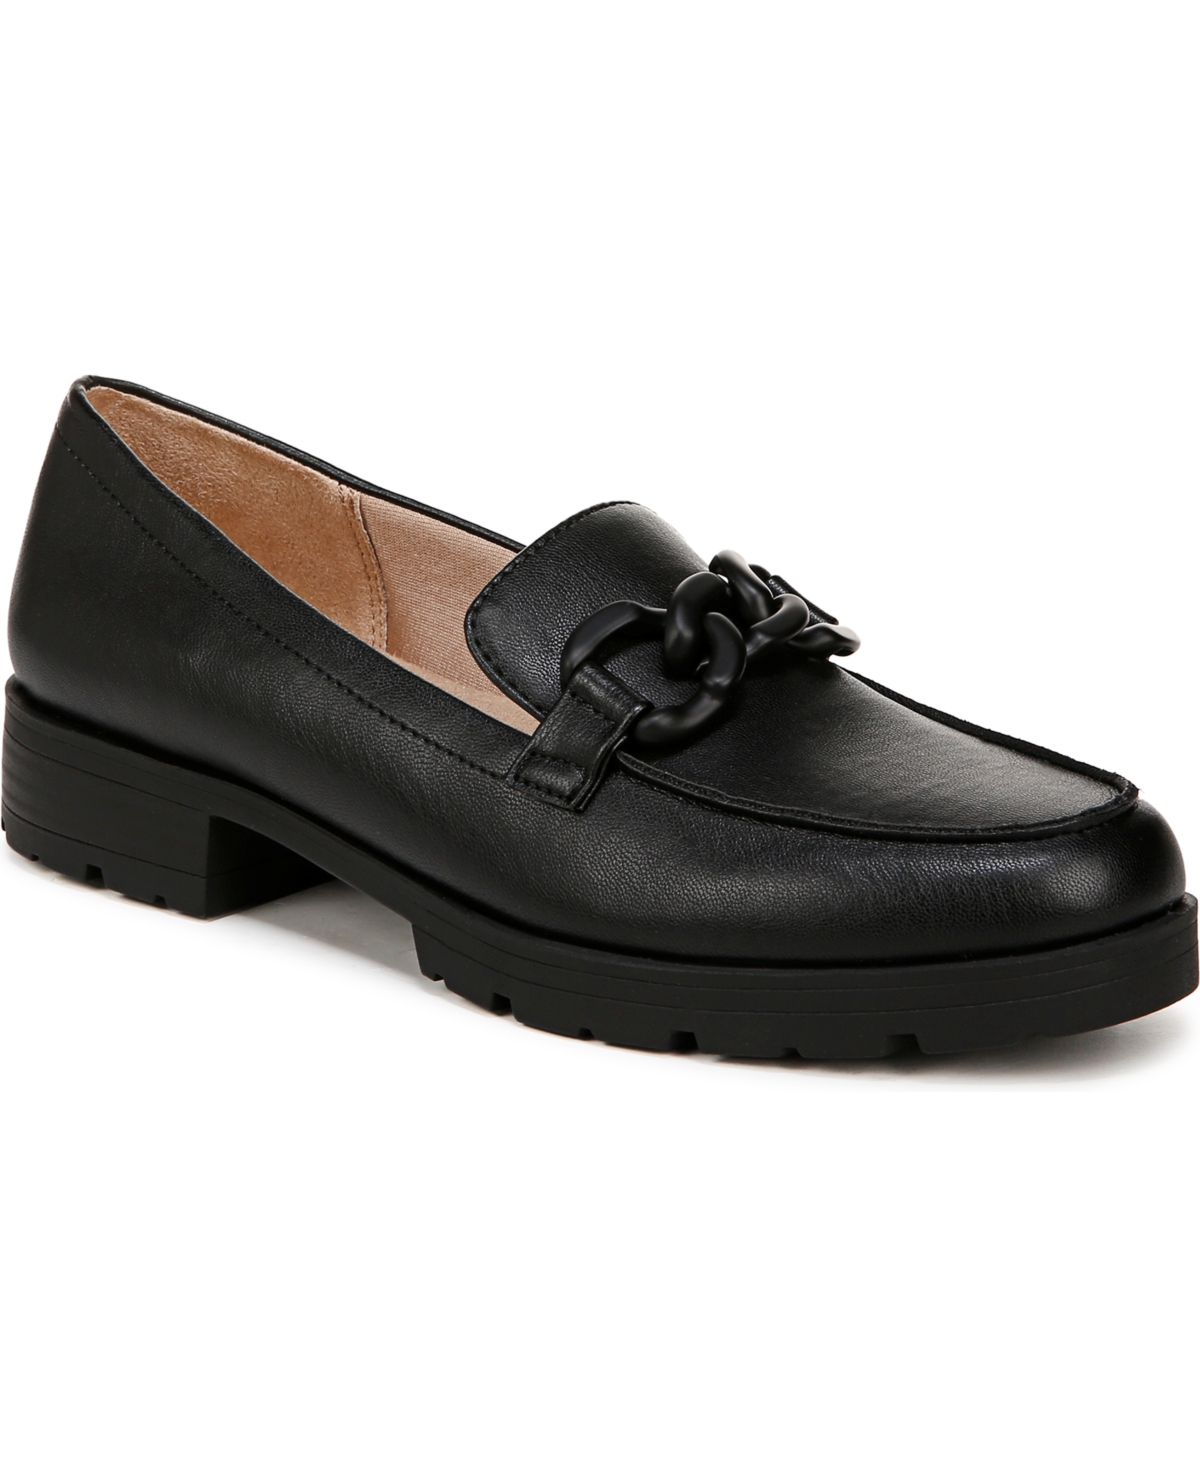 Lifestride Women's London 2 Chain Detail Lug Sole Loafers In Black Faux Leather